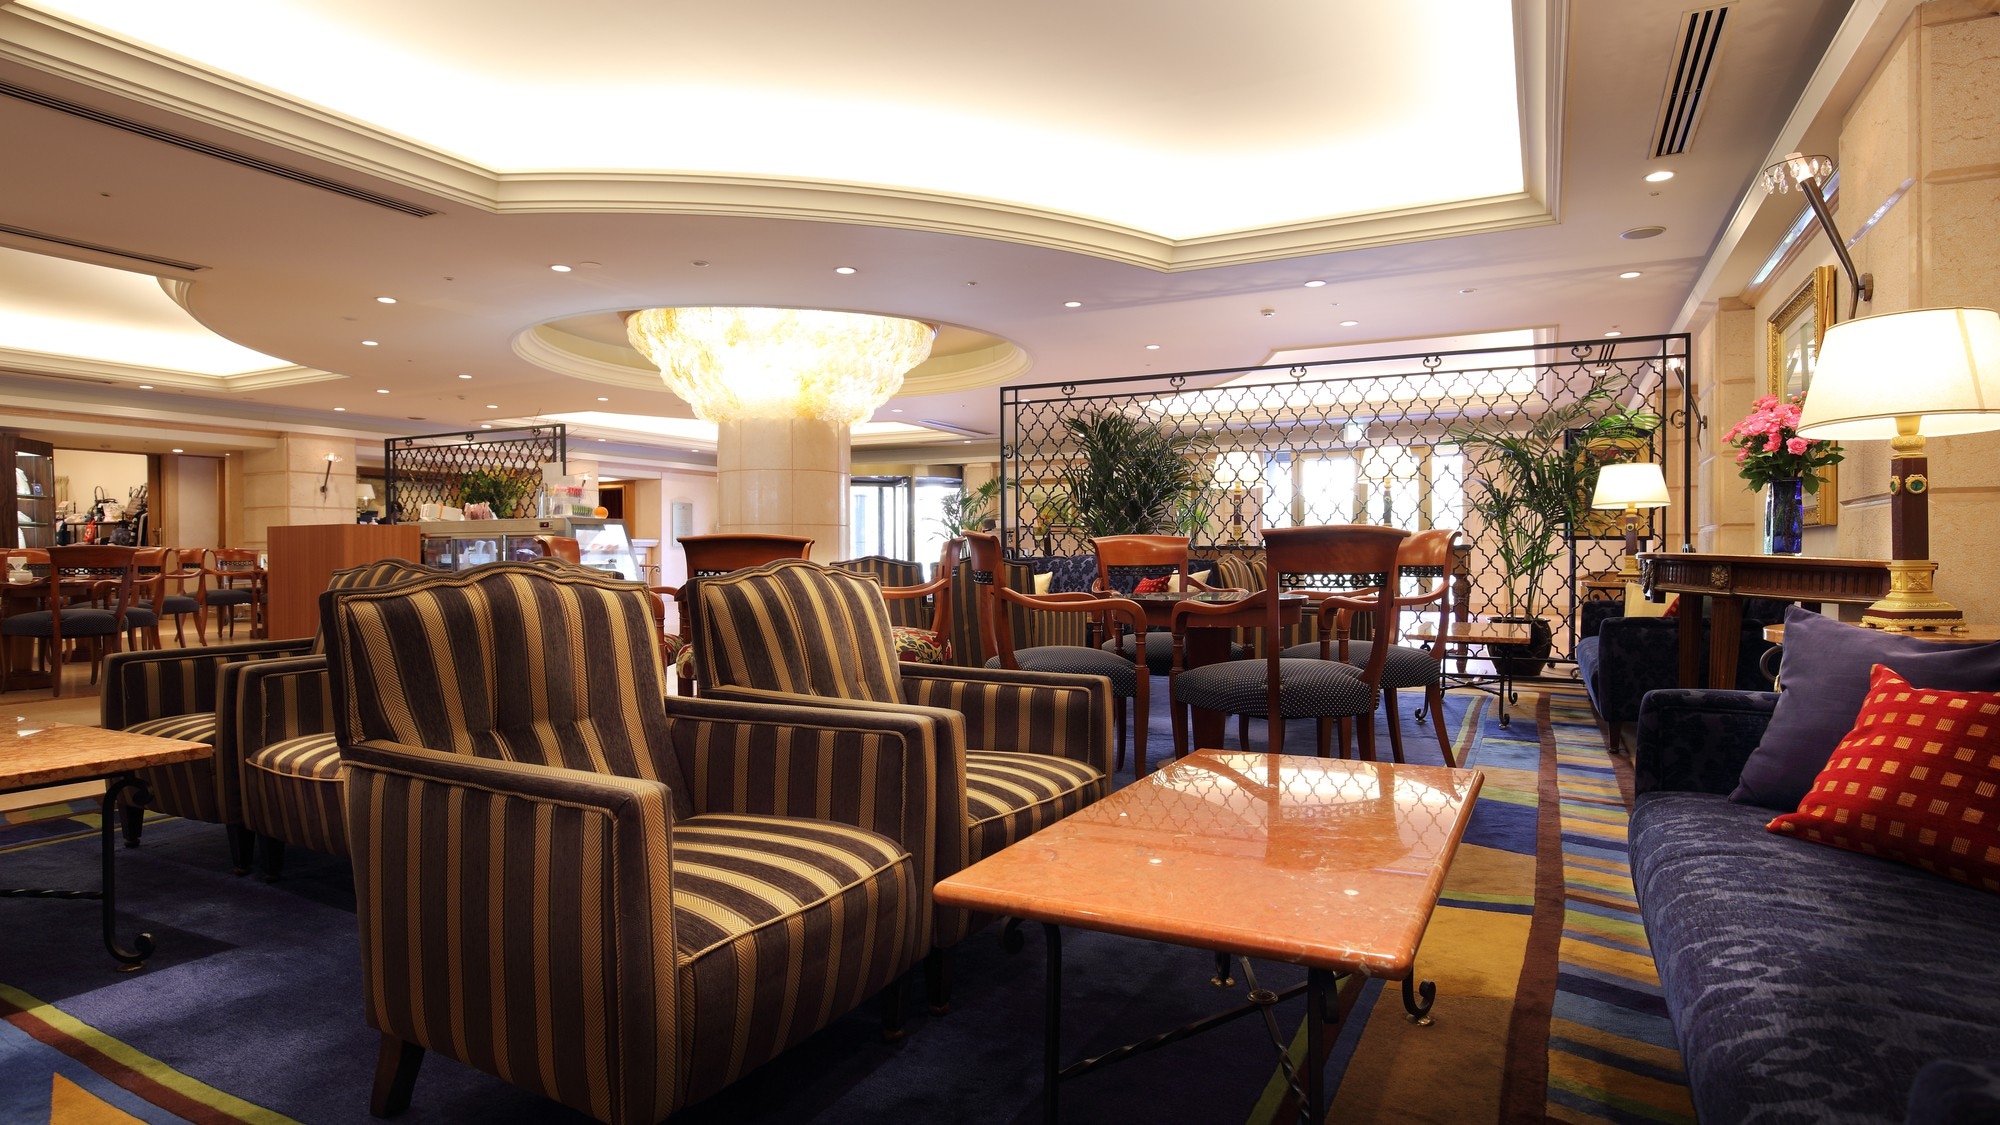 Lounge space on the 1st floor of the hotel where you can enjoy light meals and coffee